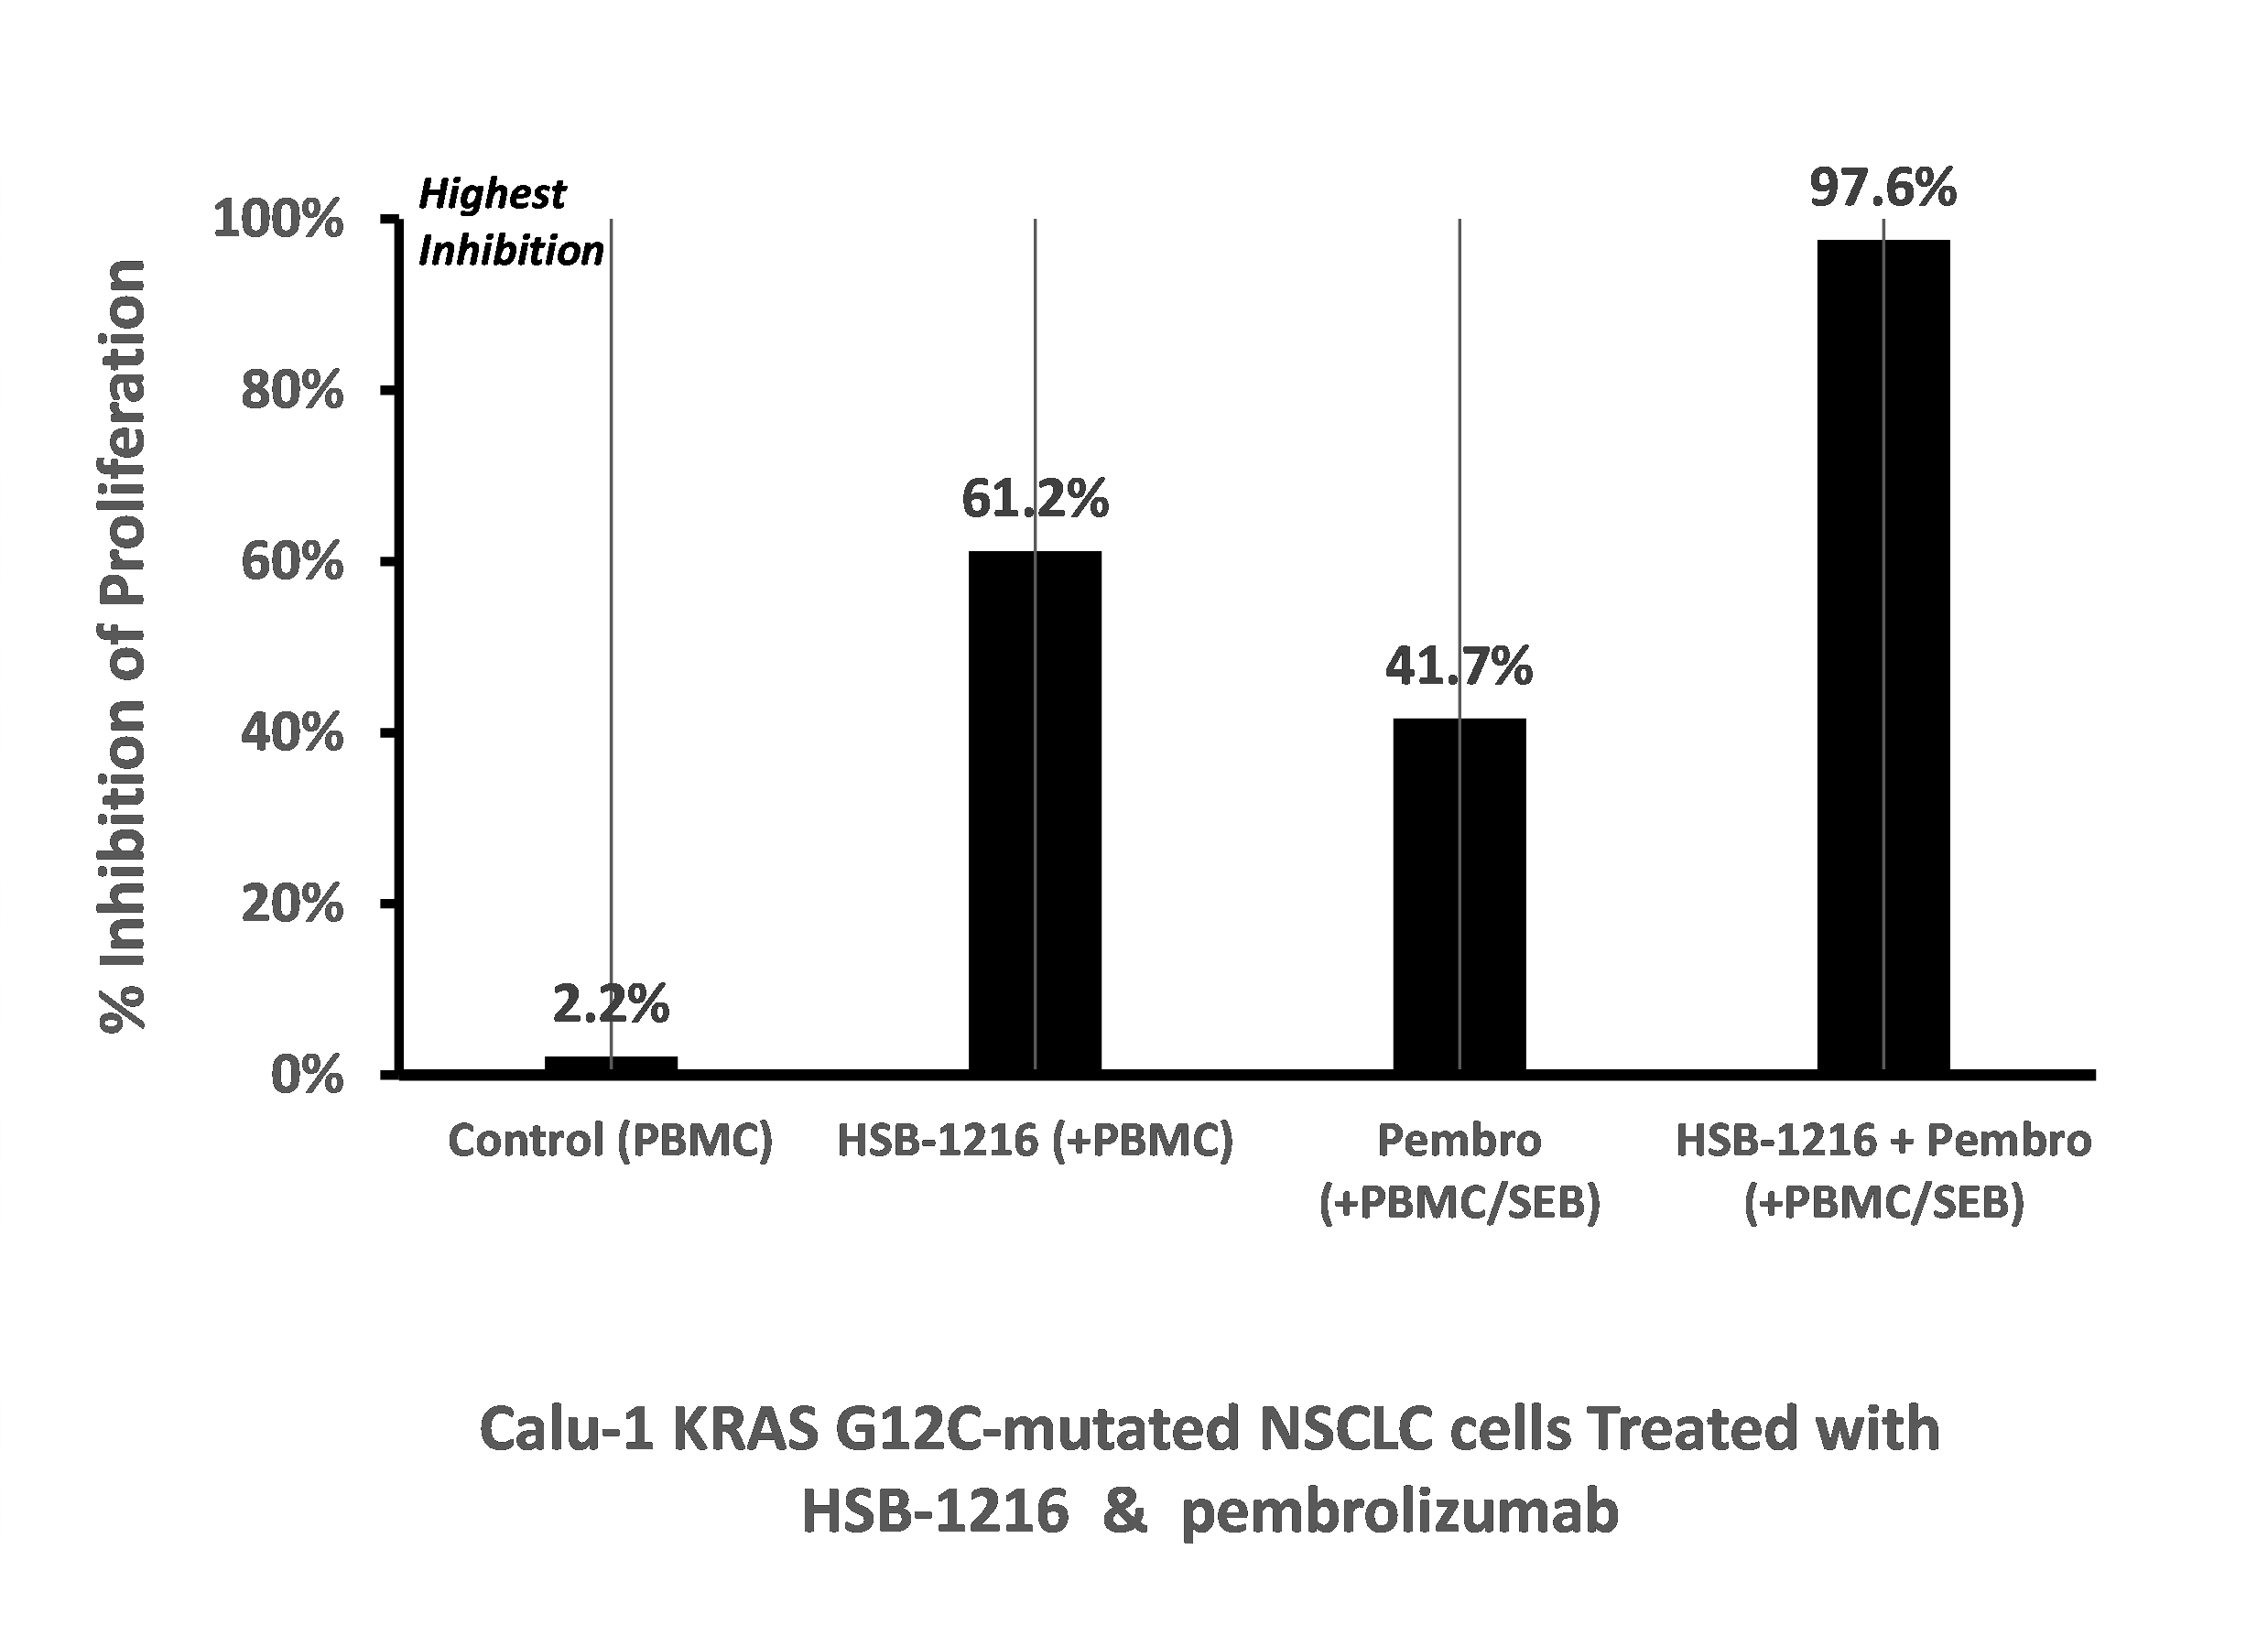 In a KRAS G12C-mutated NSCLC cell line, Calu-1, Hillstream BioPharma Demonstrated Significantly Greater Tumor Inhibition Combining Pembrolizumab, an anti-PD-1 antibody, and HSB-1216, a Ferroptosis Inducer